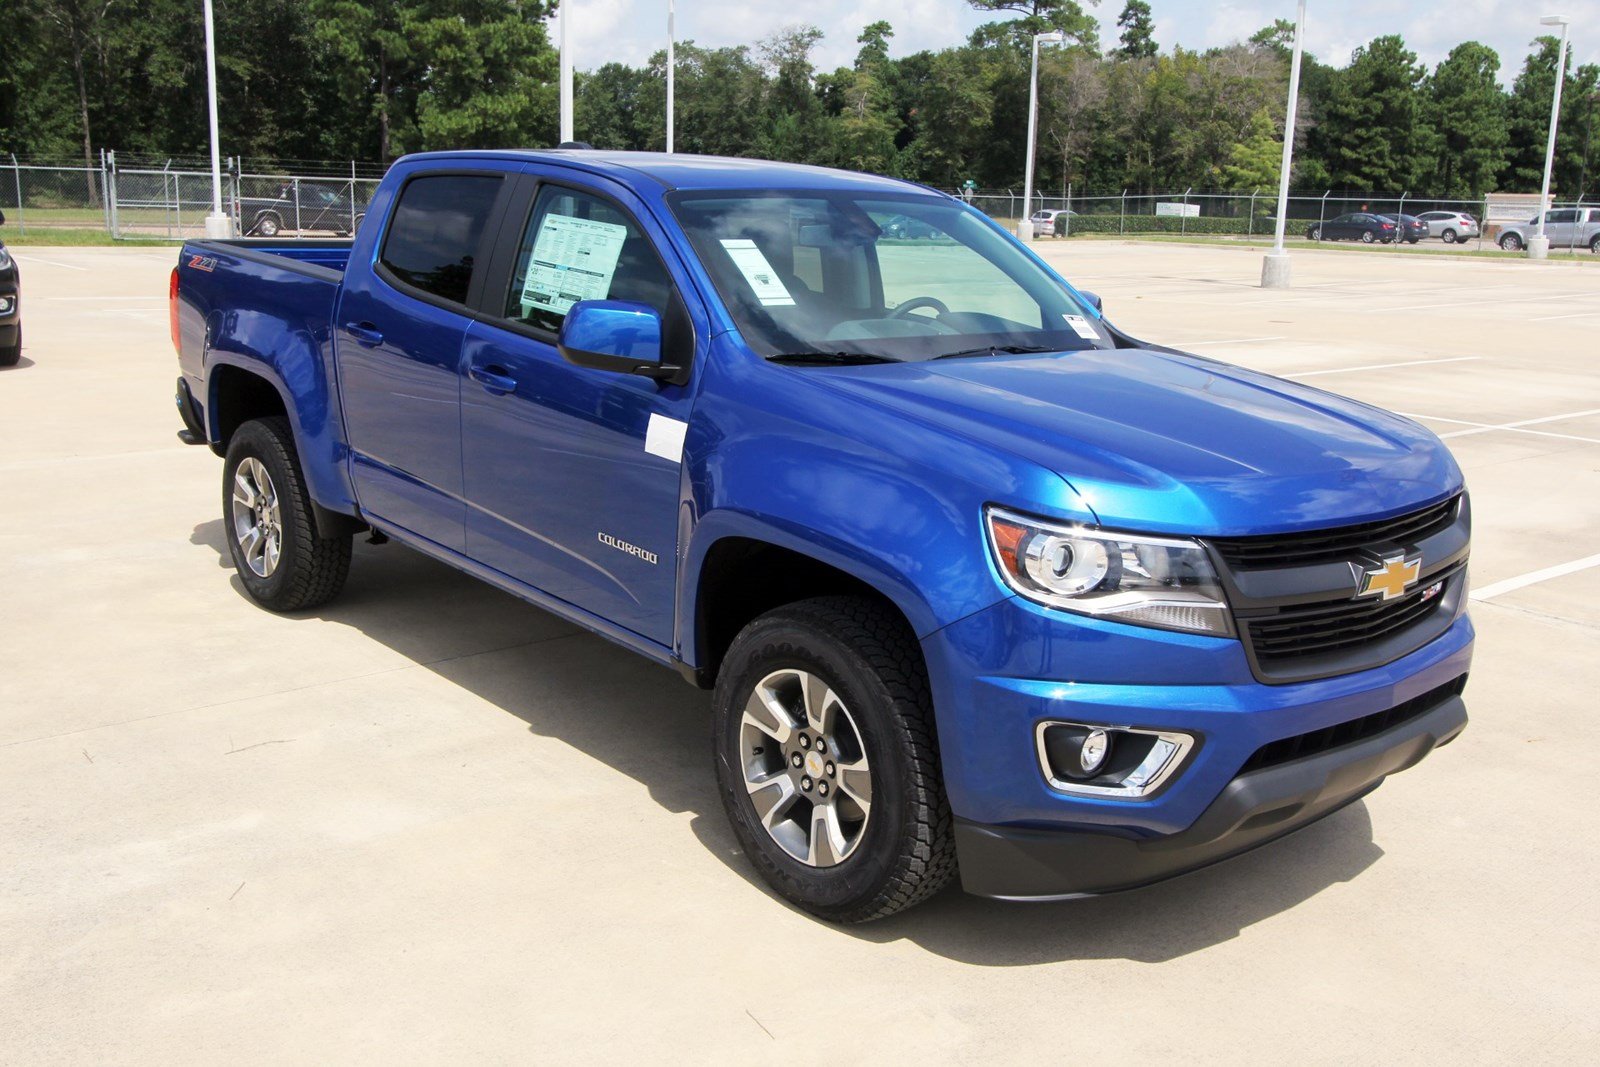 new-2020-chevrolet-colorado-2wd-z71-crew-cab-pickup-in-humble-02060087